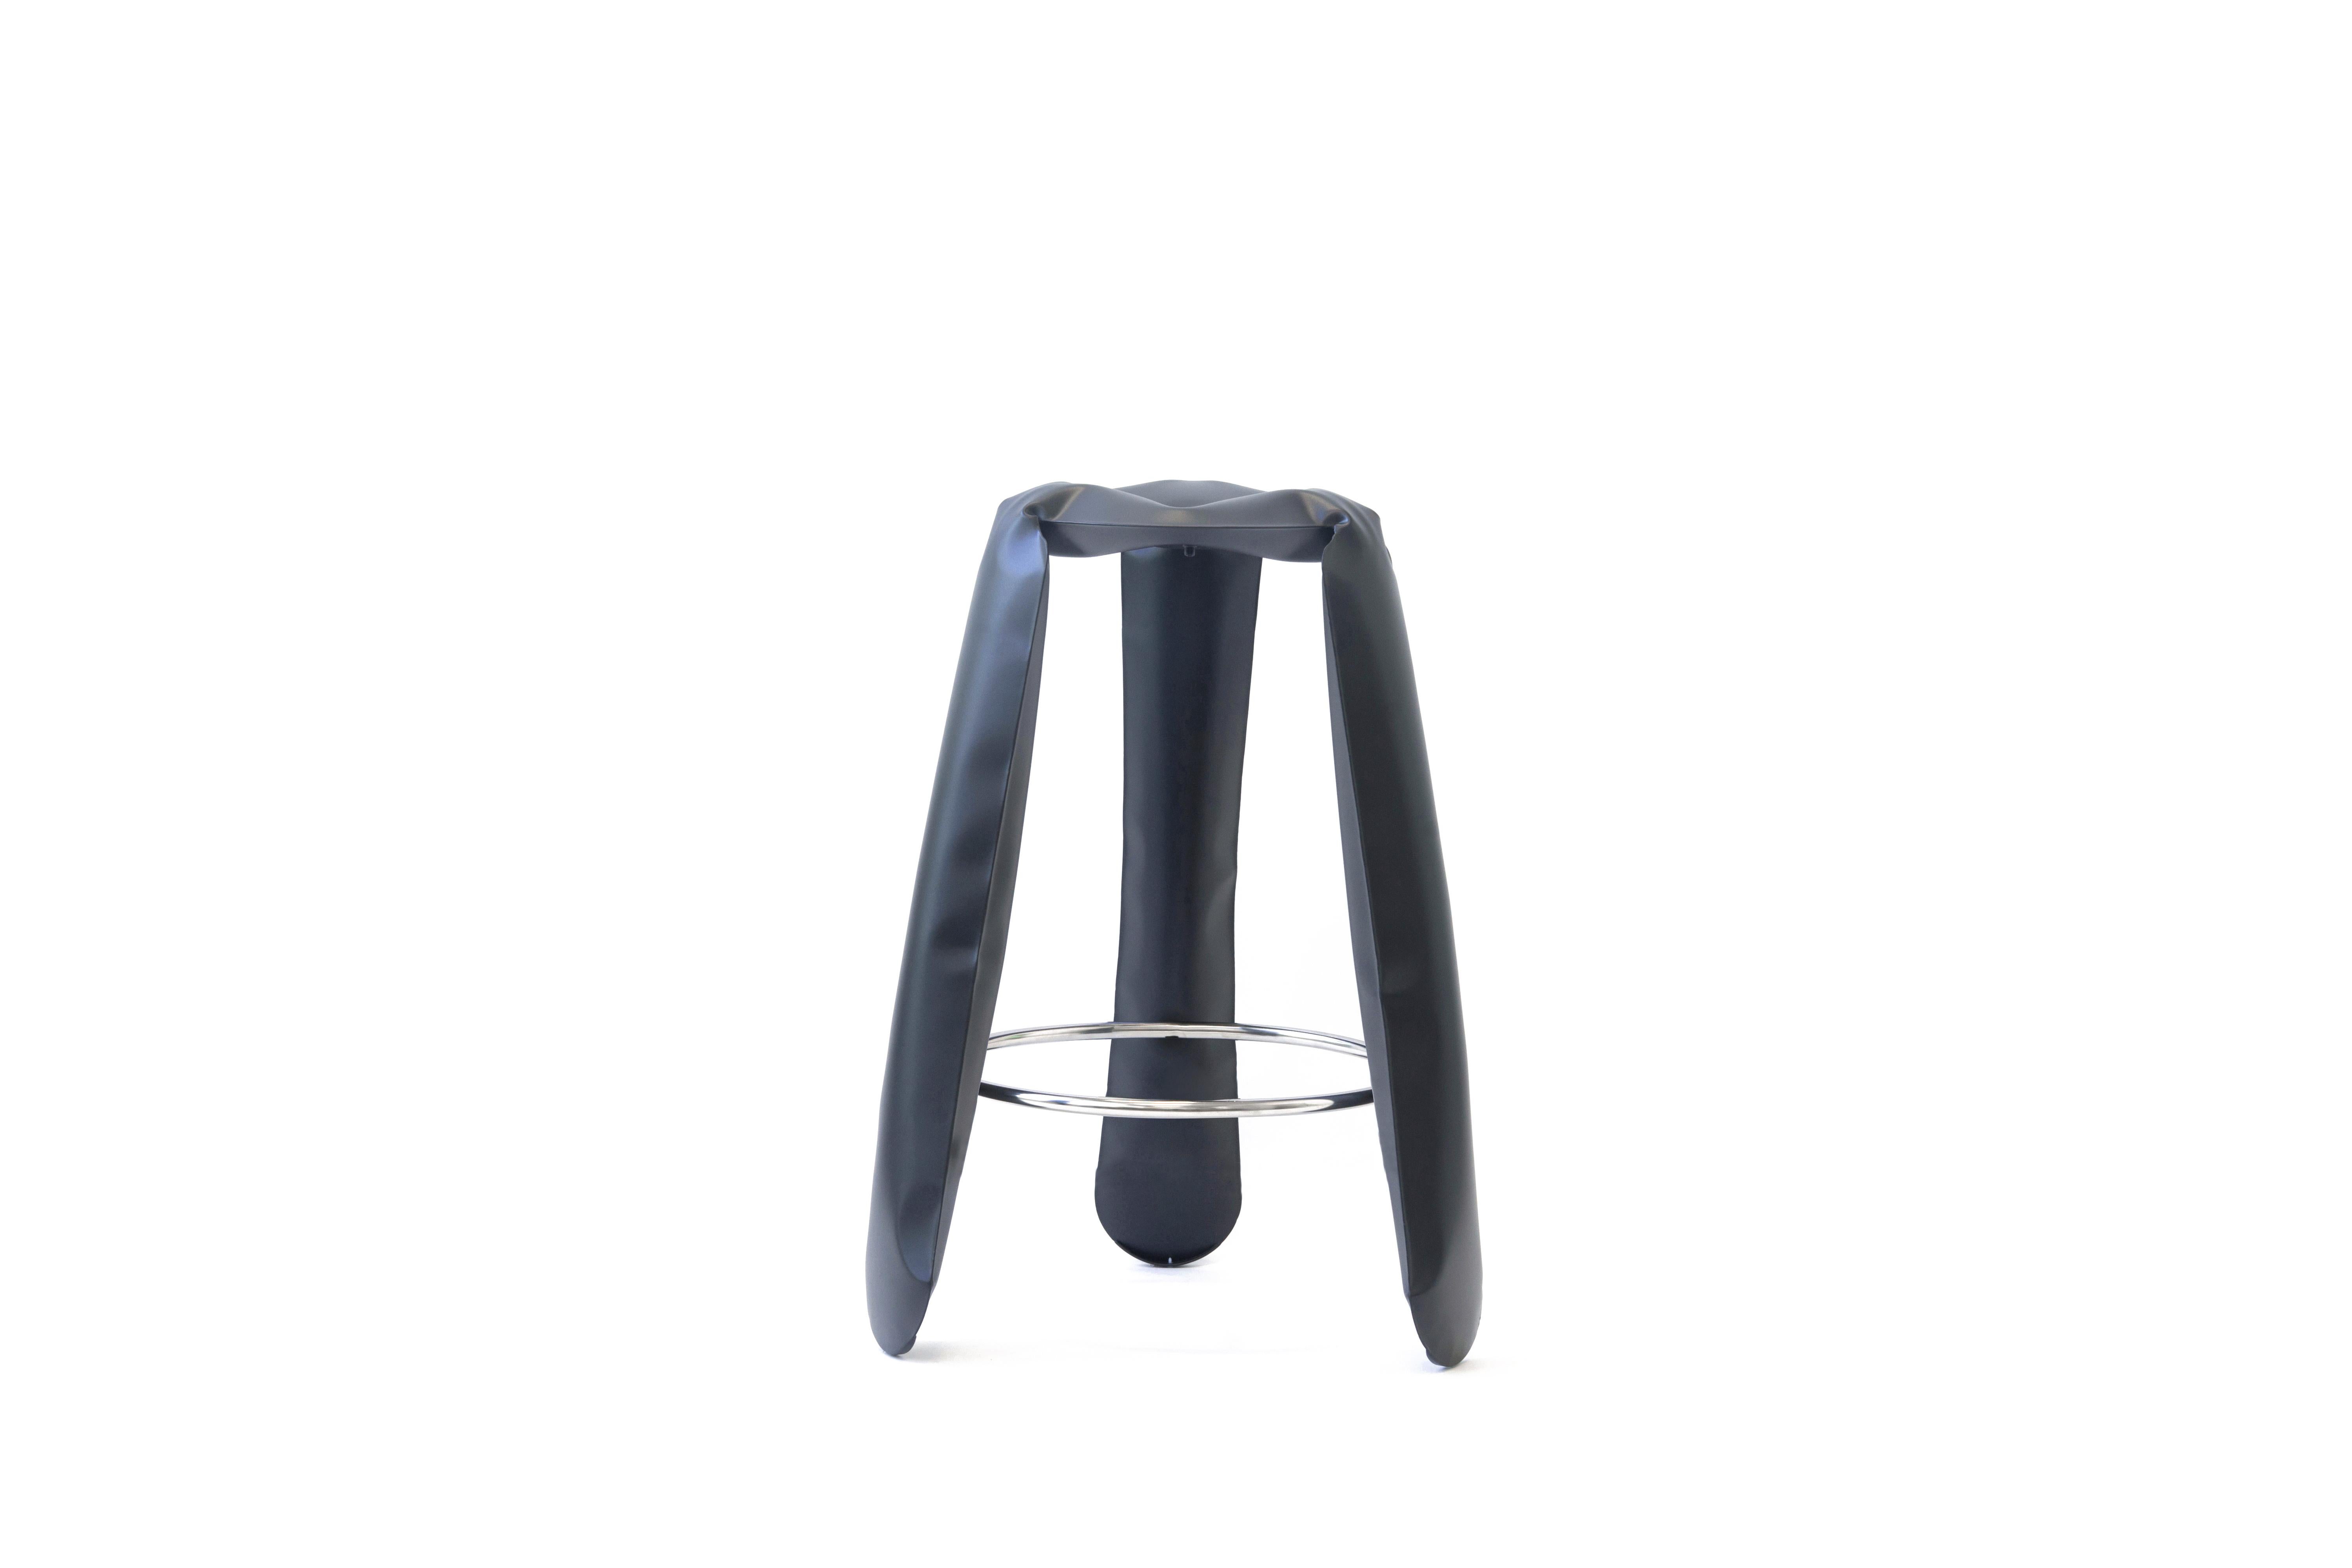 Graphite Steel Bar Plopp stool by Zieta
Dimensions: D 35 x H 75 cm 
Material: Carbon steel. 
Finish: Powder-Coated.
Available in colors: Beige, black, white, blue, graphite, moss, umbra gray, flaming gold, and cosmic blue. Available in Stainless